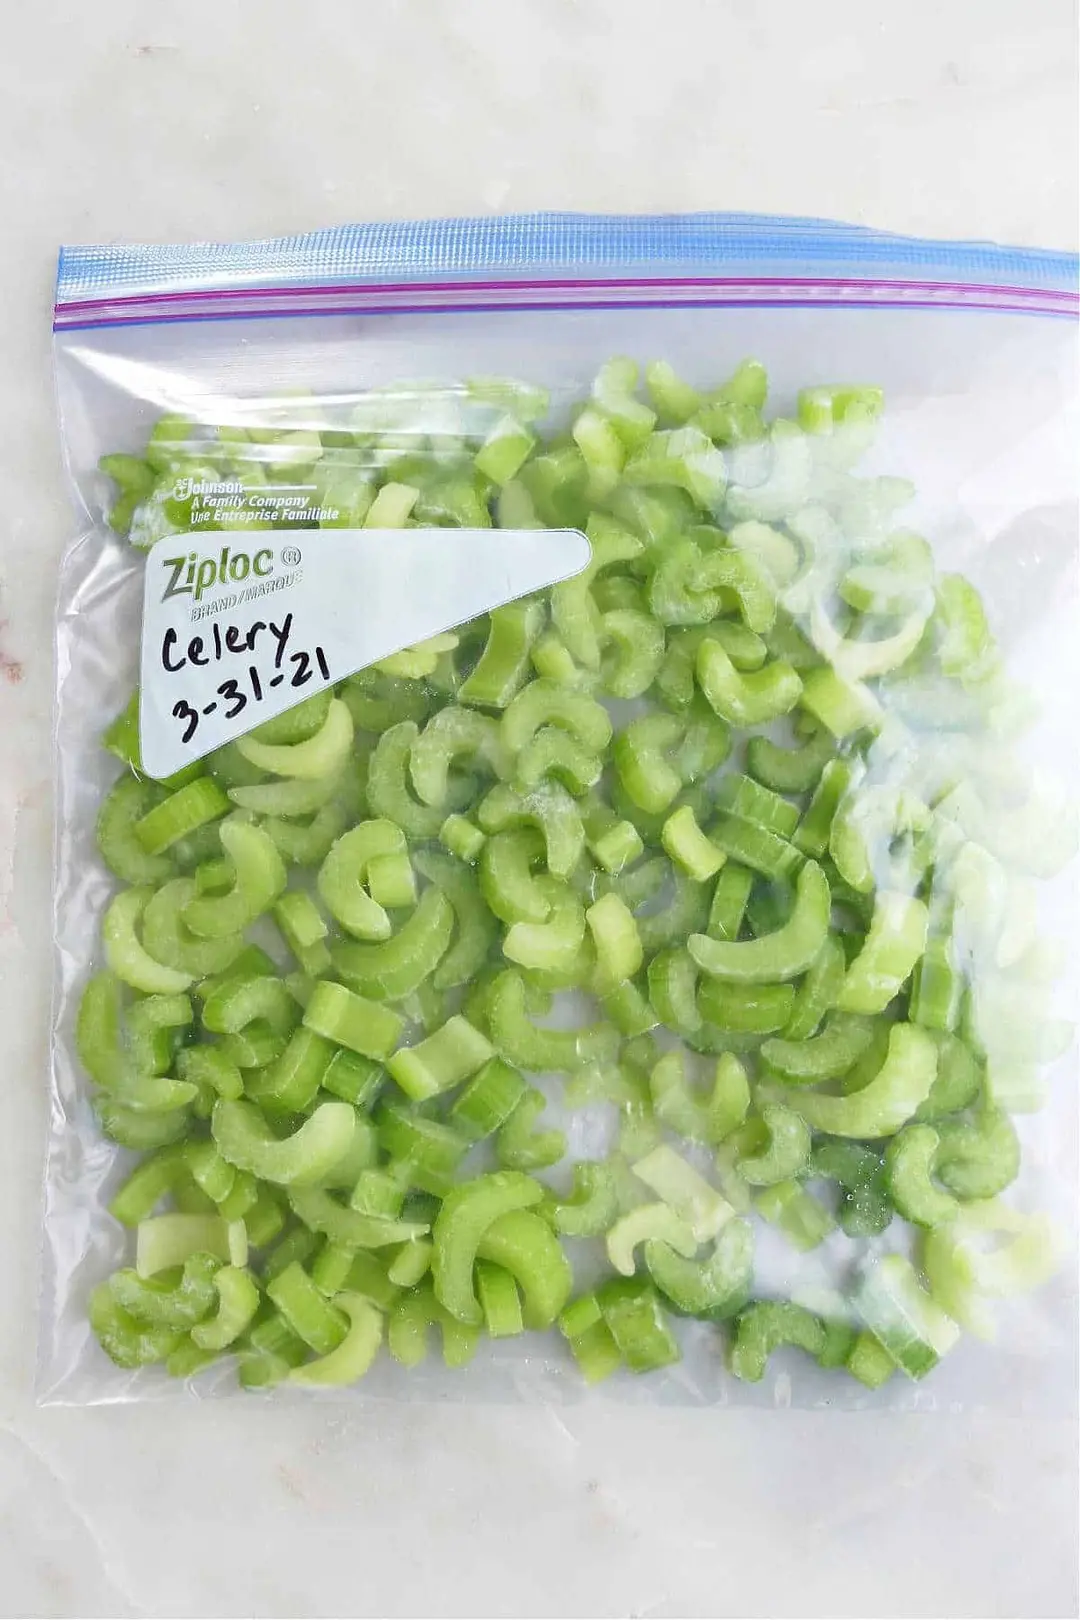 Freezing celery in a bag